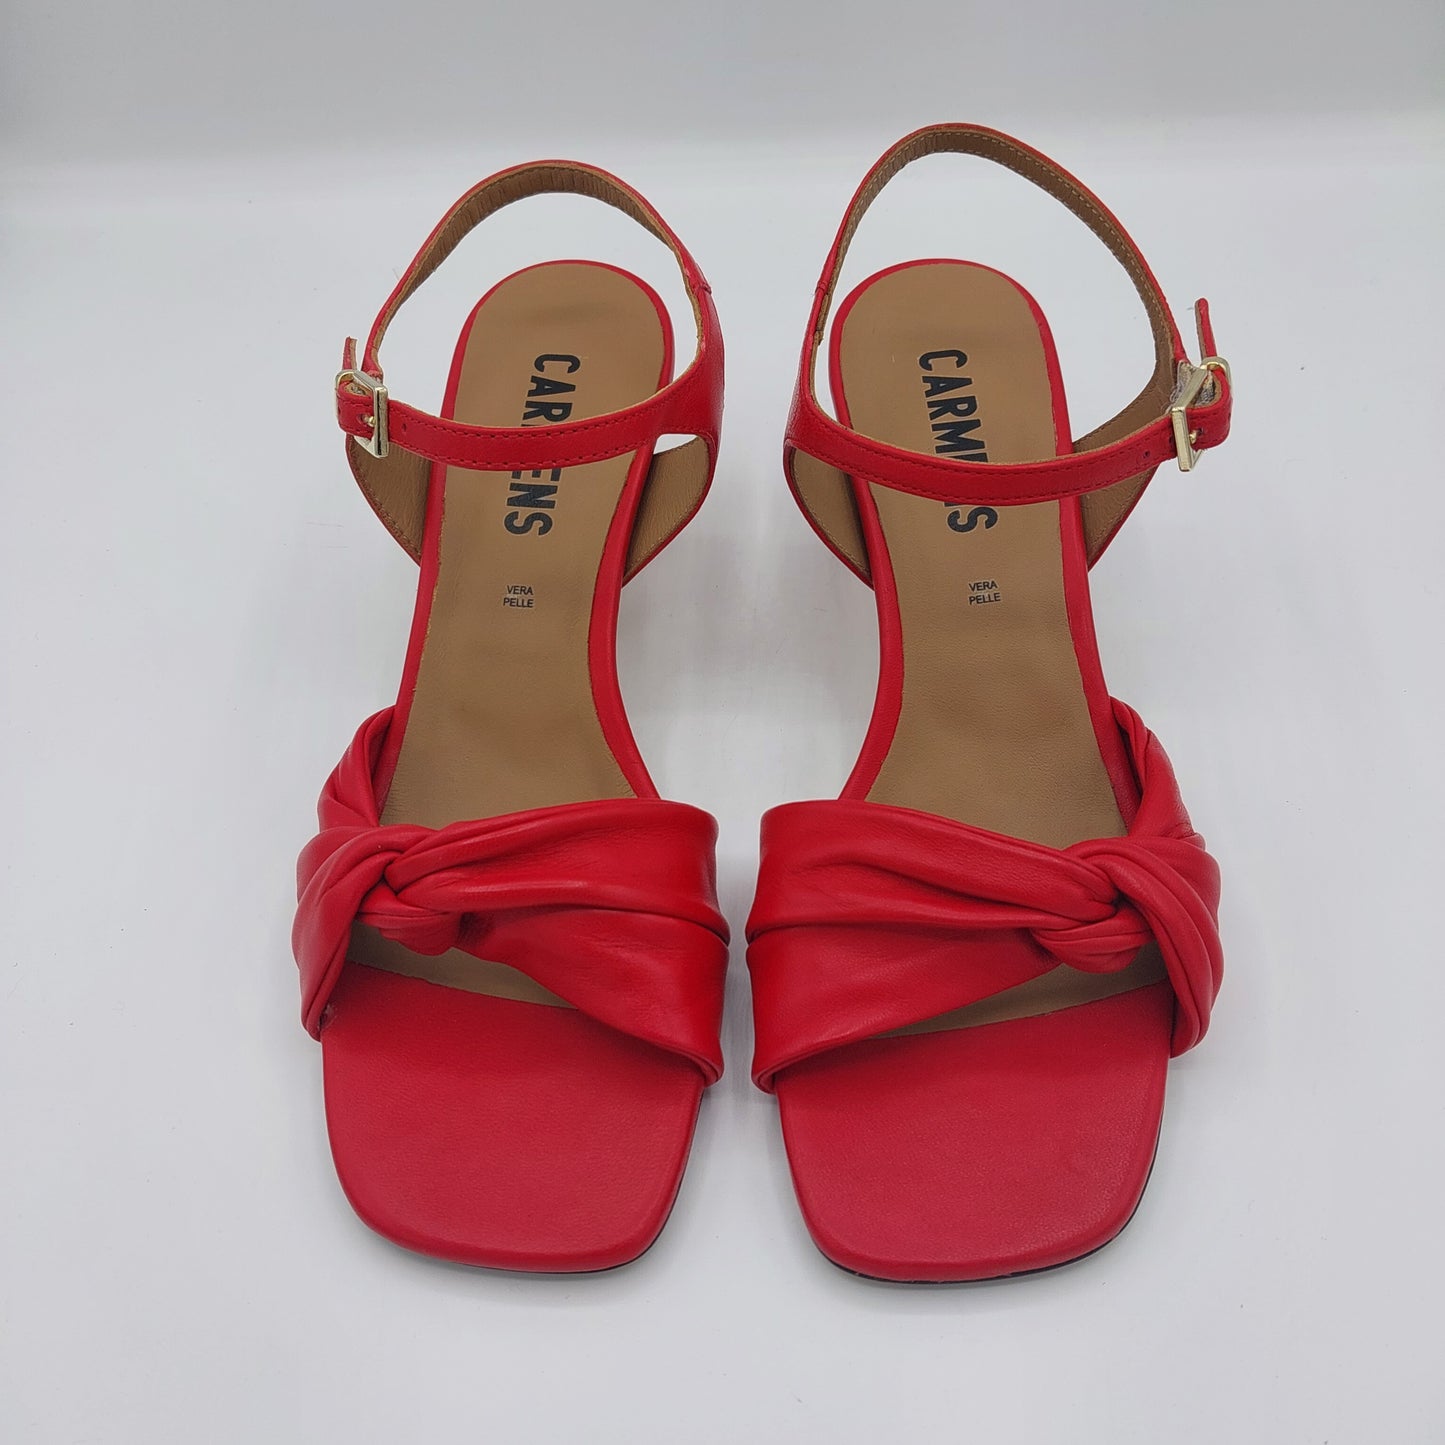 Carmens sandal in red leather